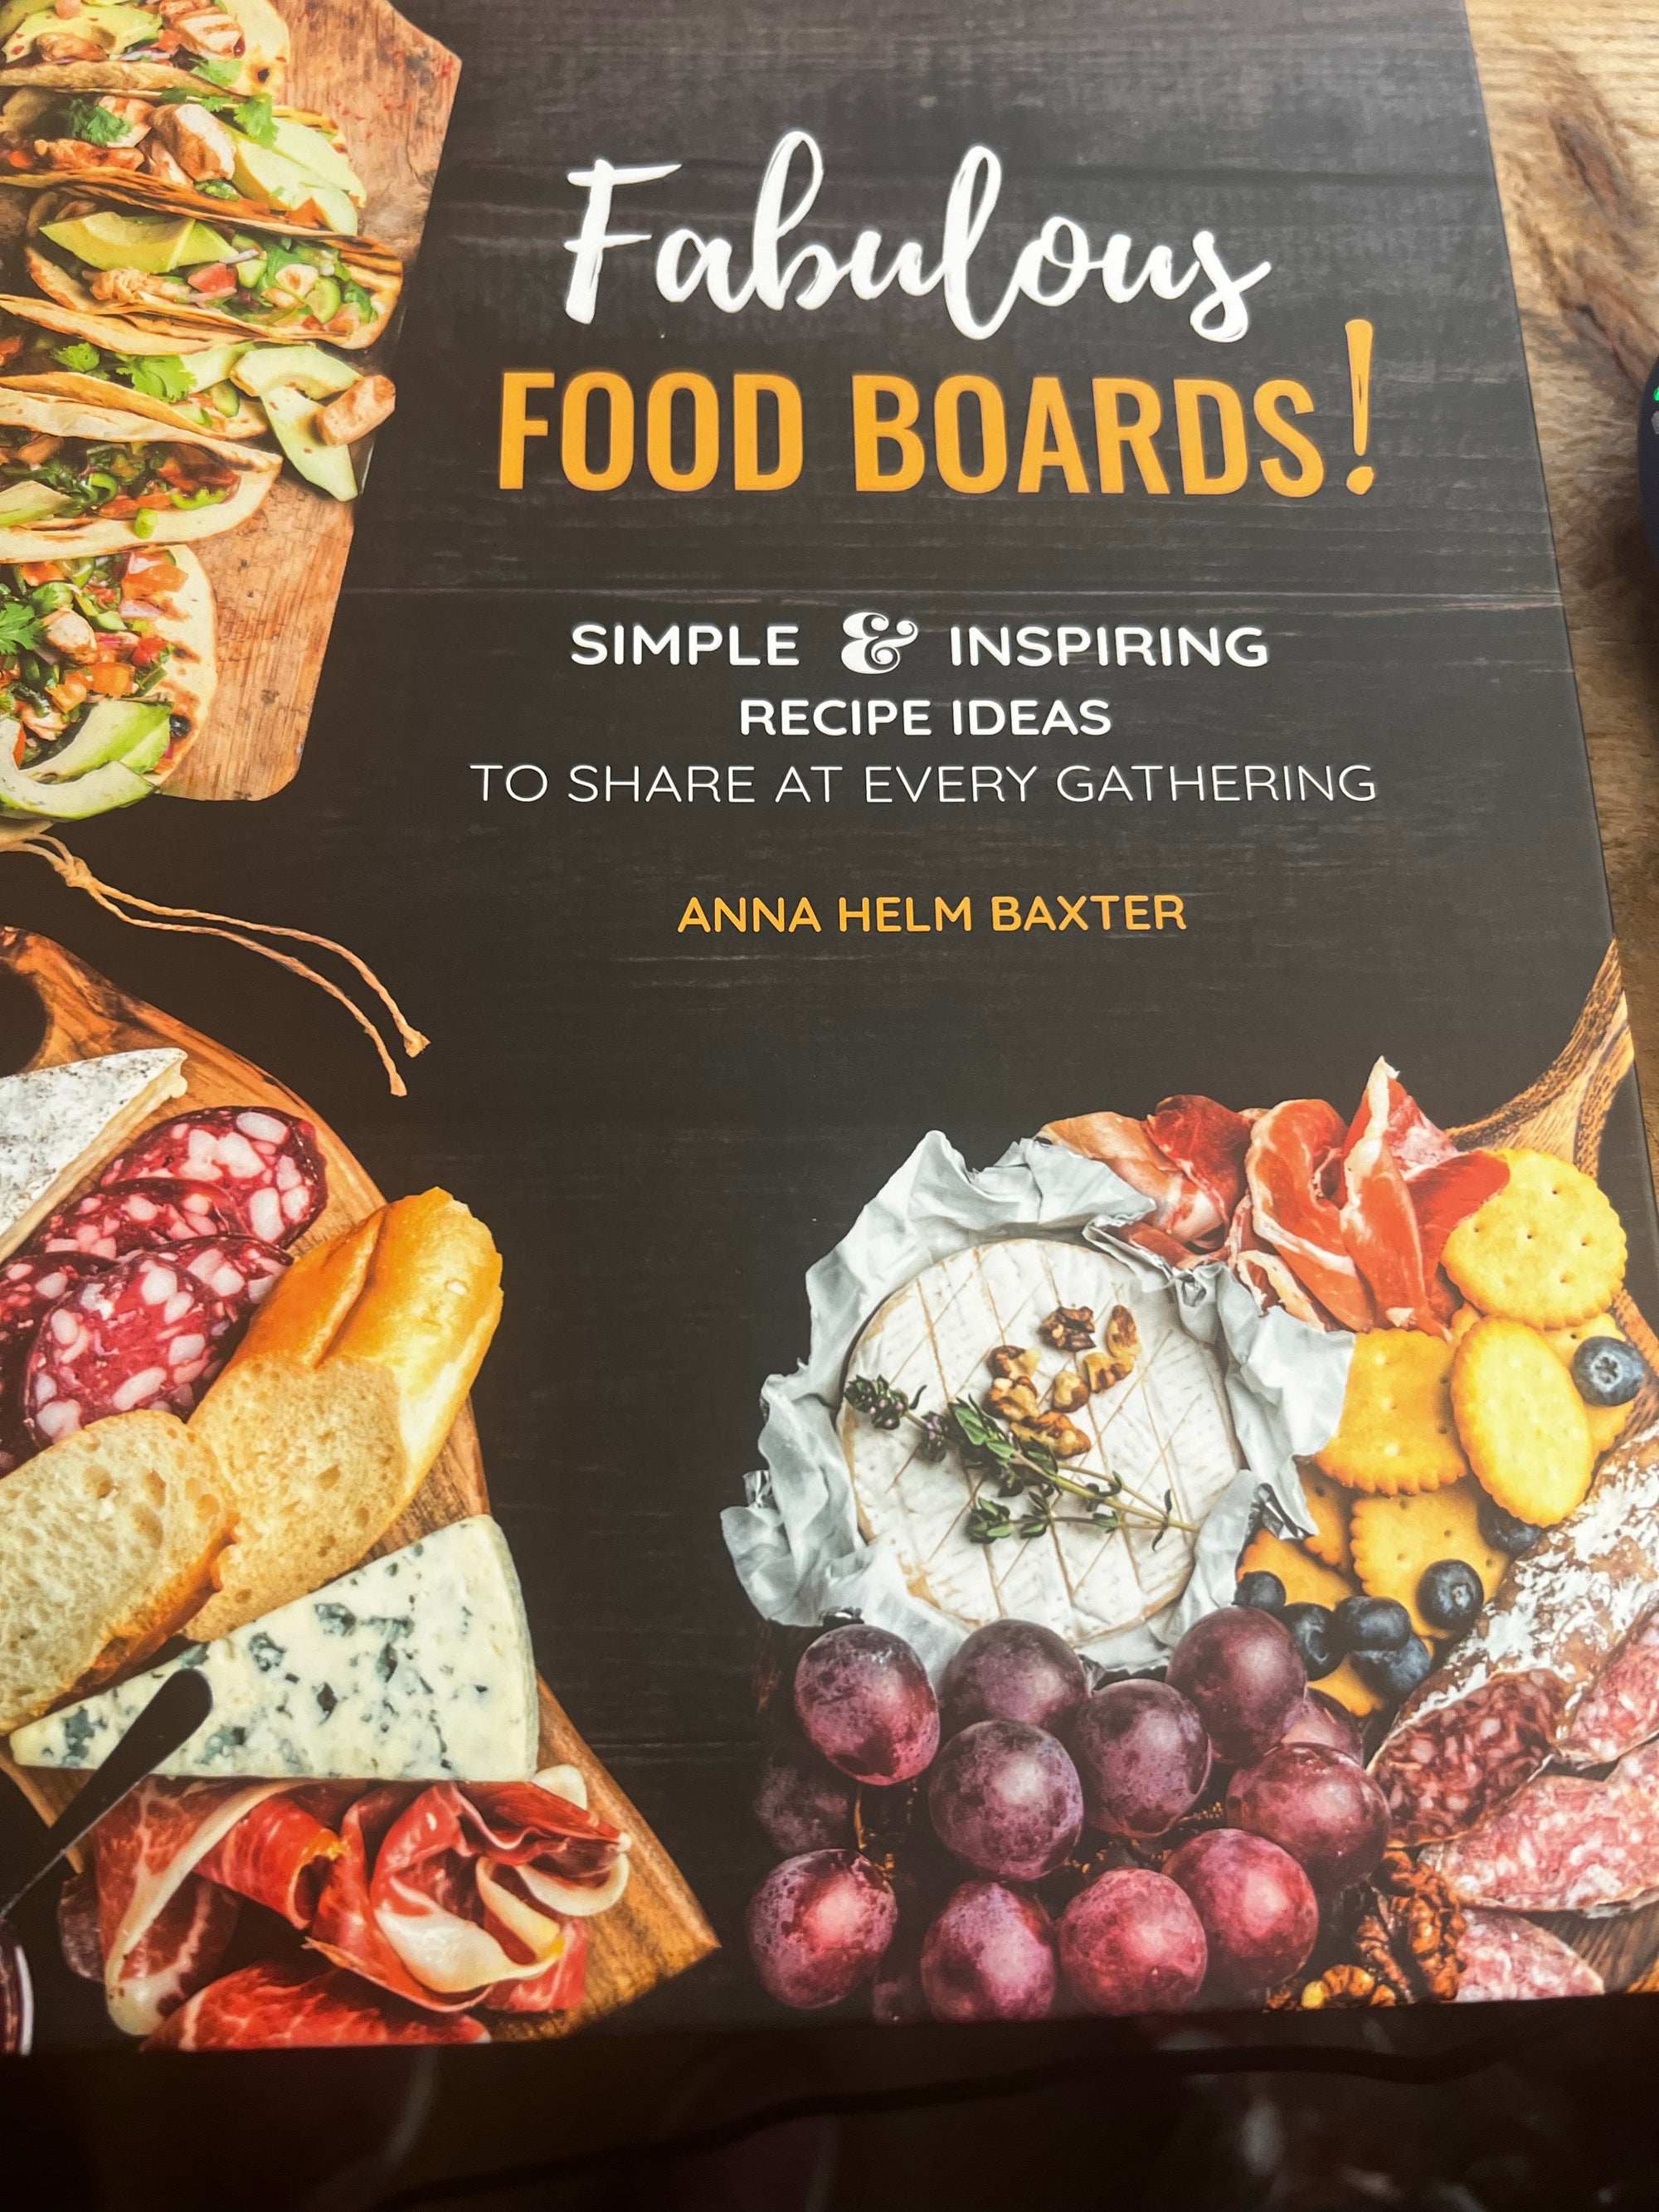 Fabulous Food Boards by Helm Baxter